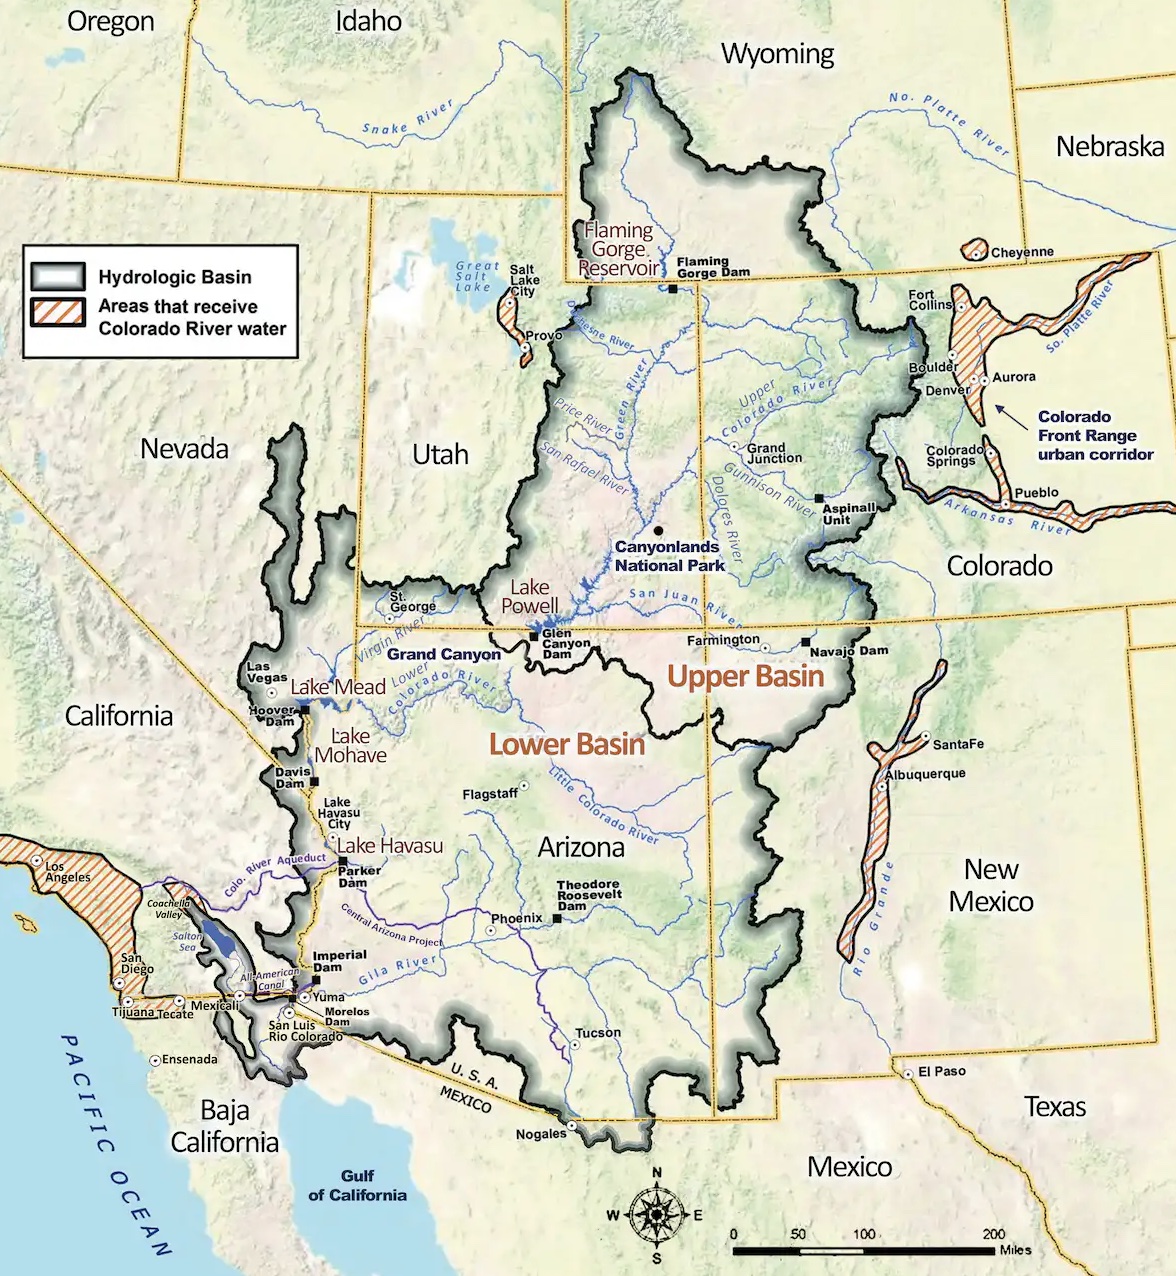 A map illustrating drought solutions in the Utah river basin.